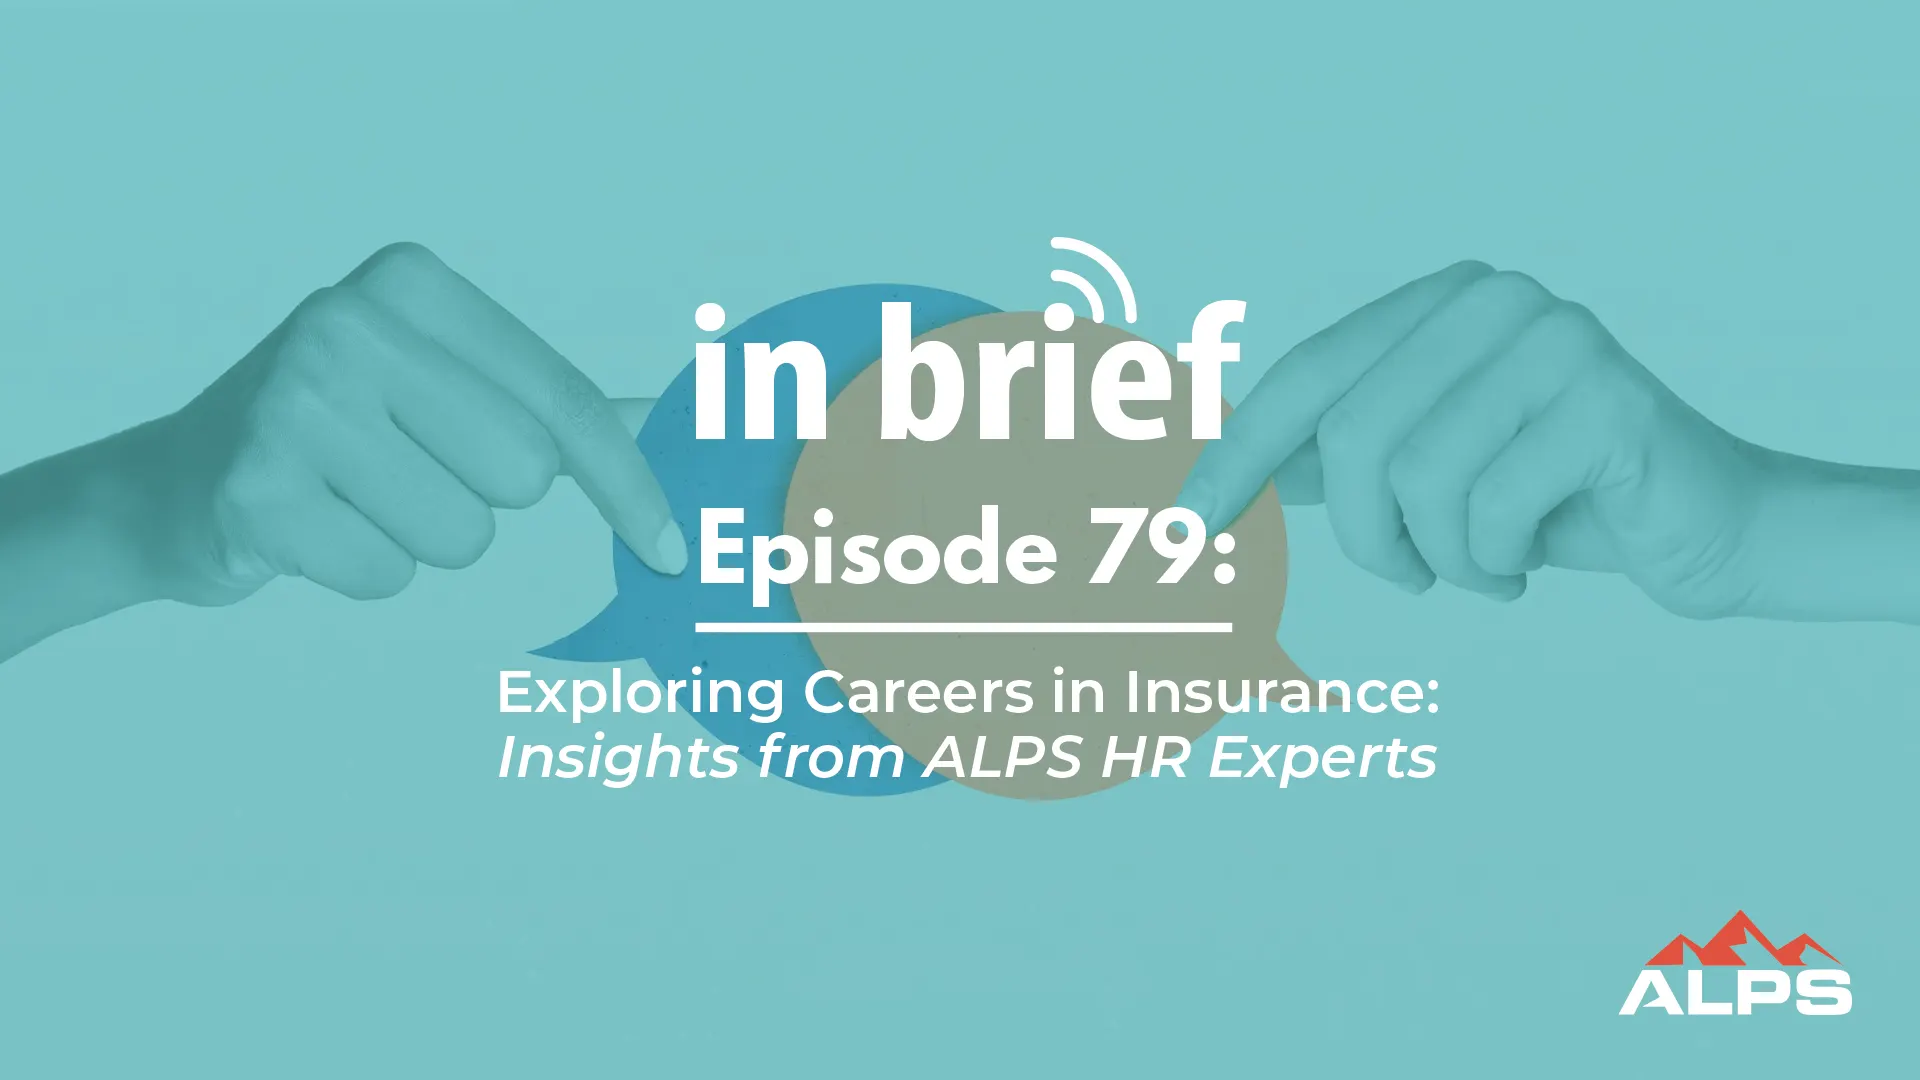 ALPS In Brief Podcast - Episode 79: Exploring Careers in Insurance: Insights from ALPS HR Experts